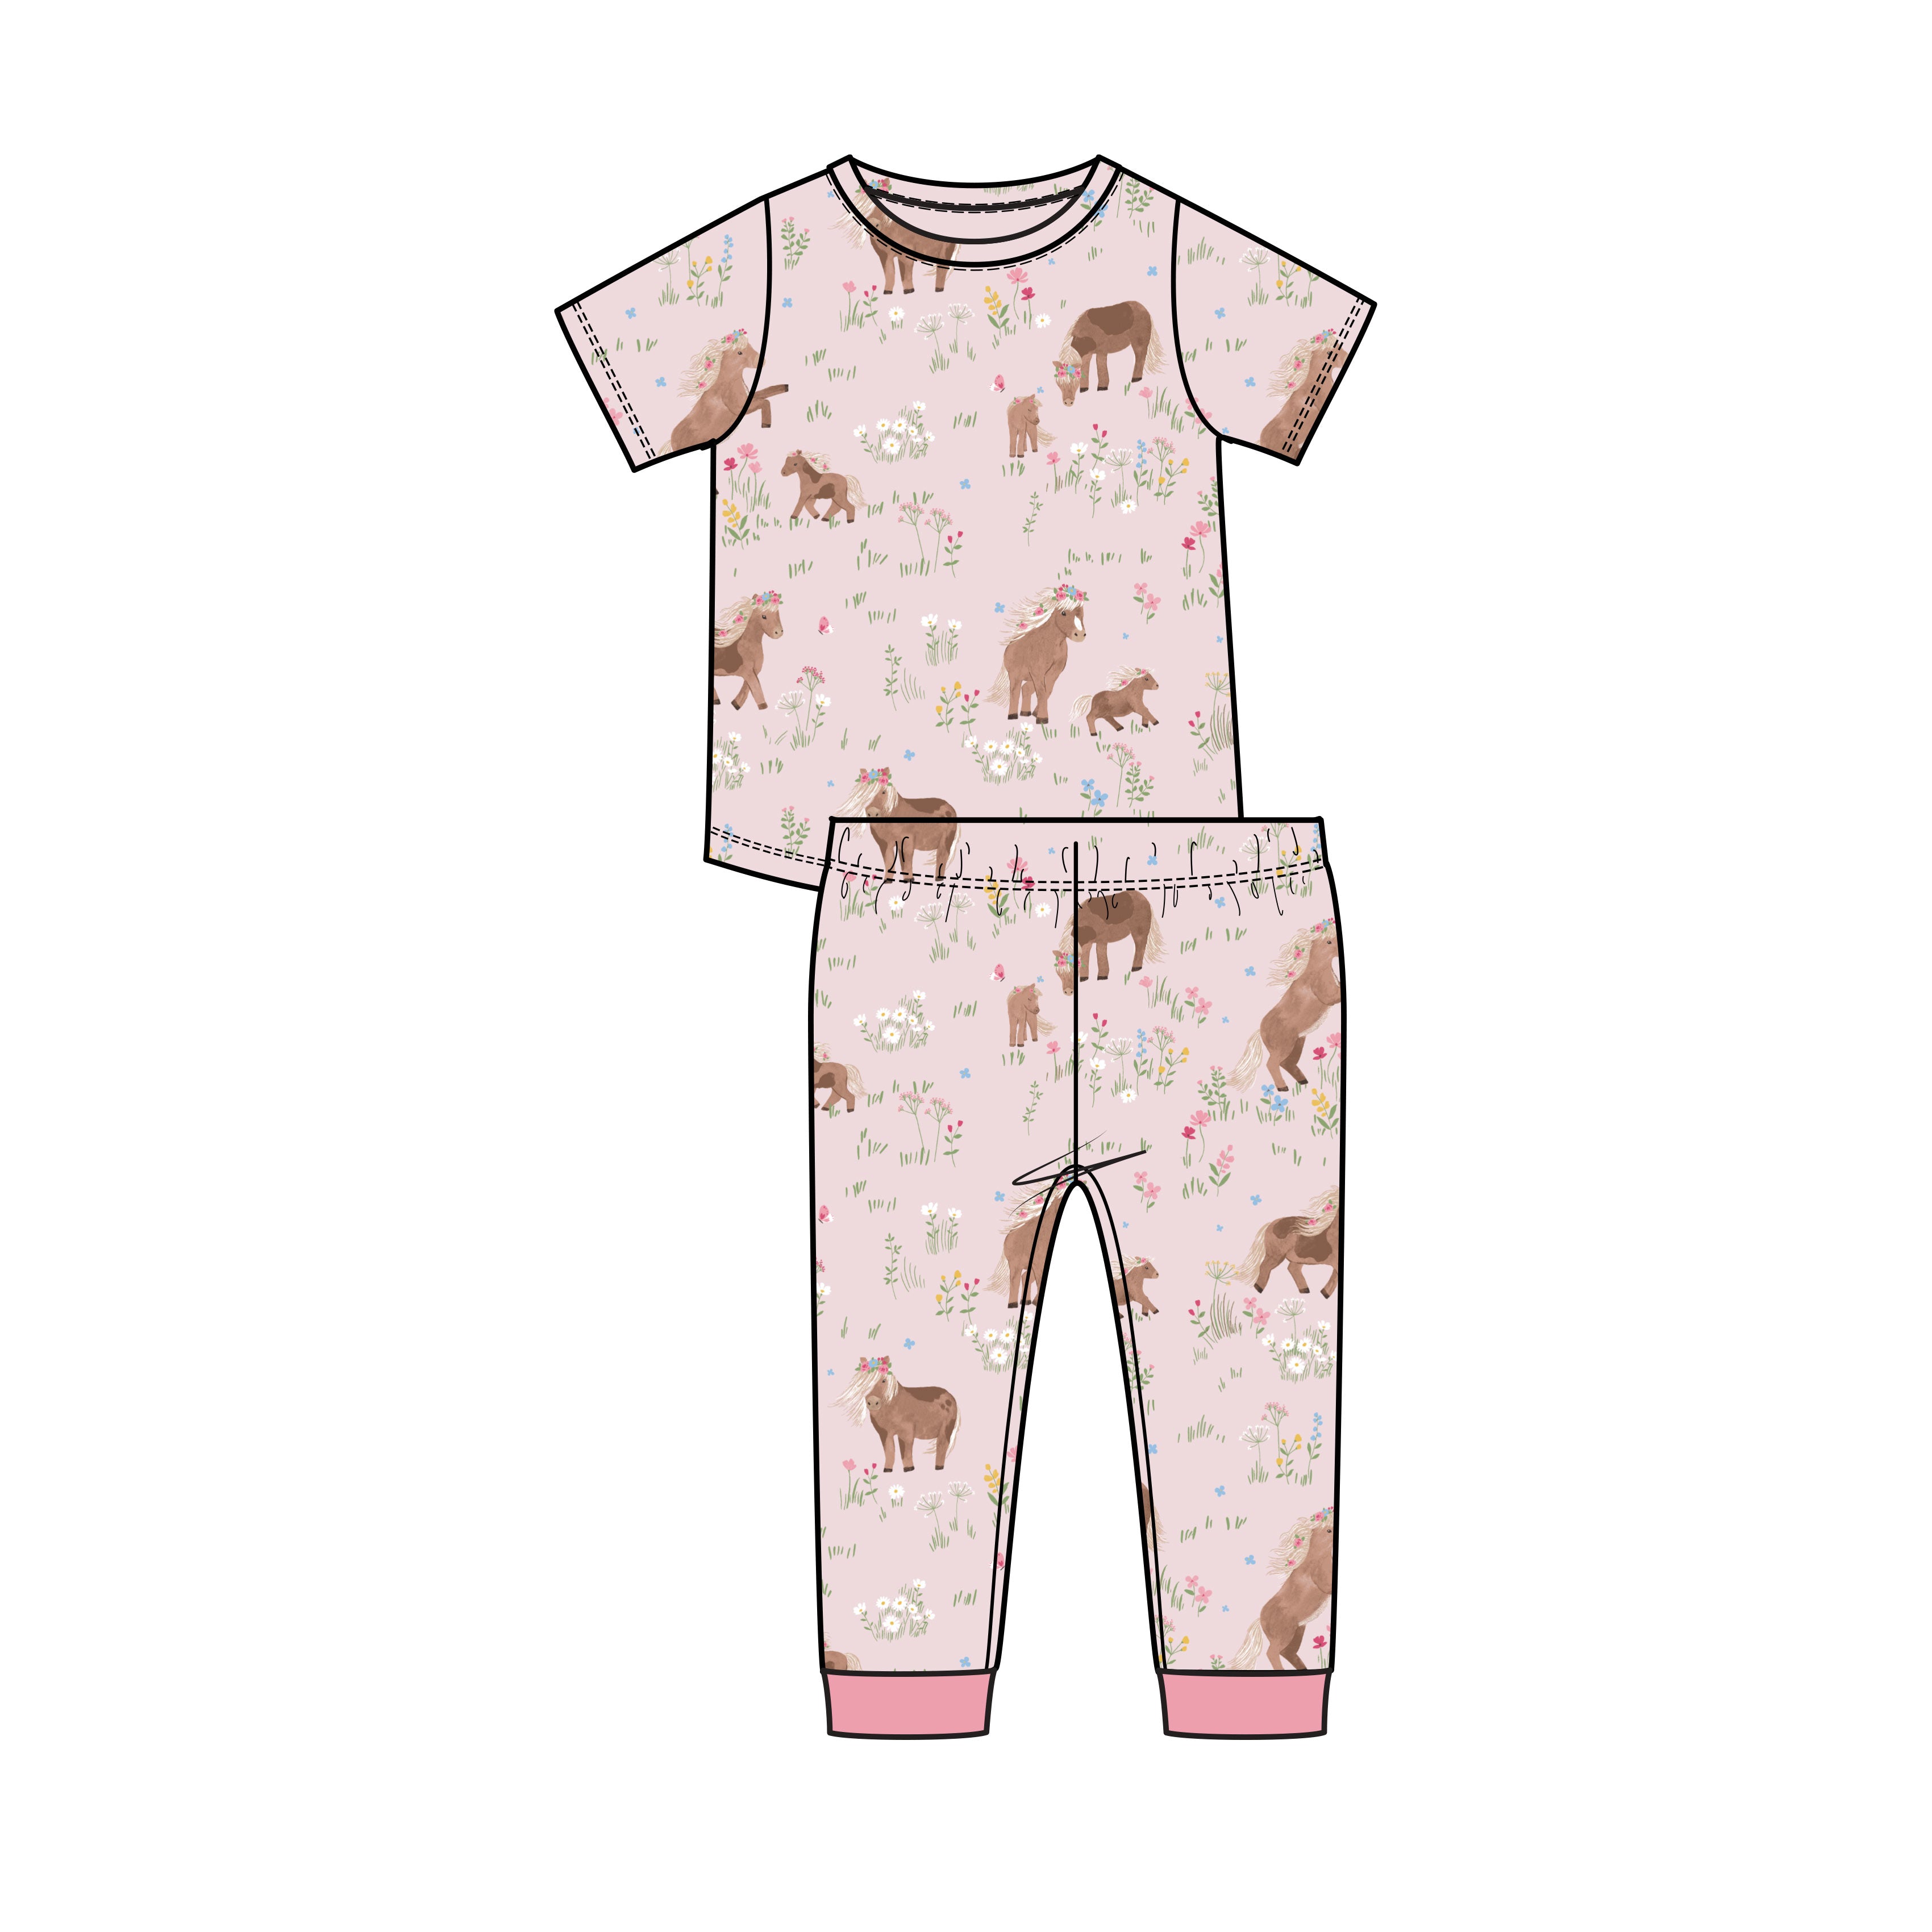 2 Piece S/S Bamboo Lounge Wear Set - Watercolor Ponies